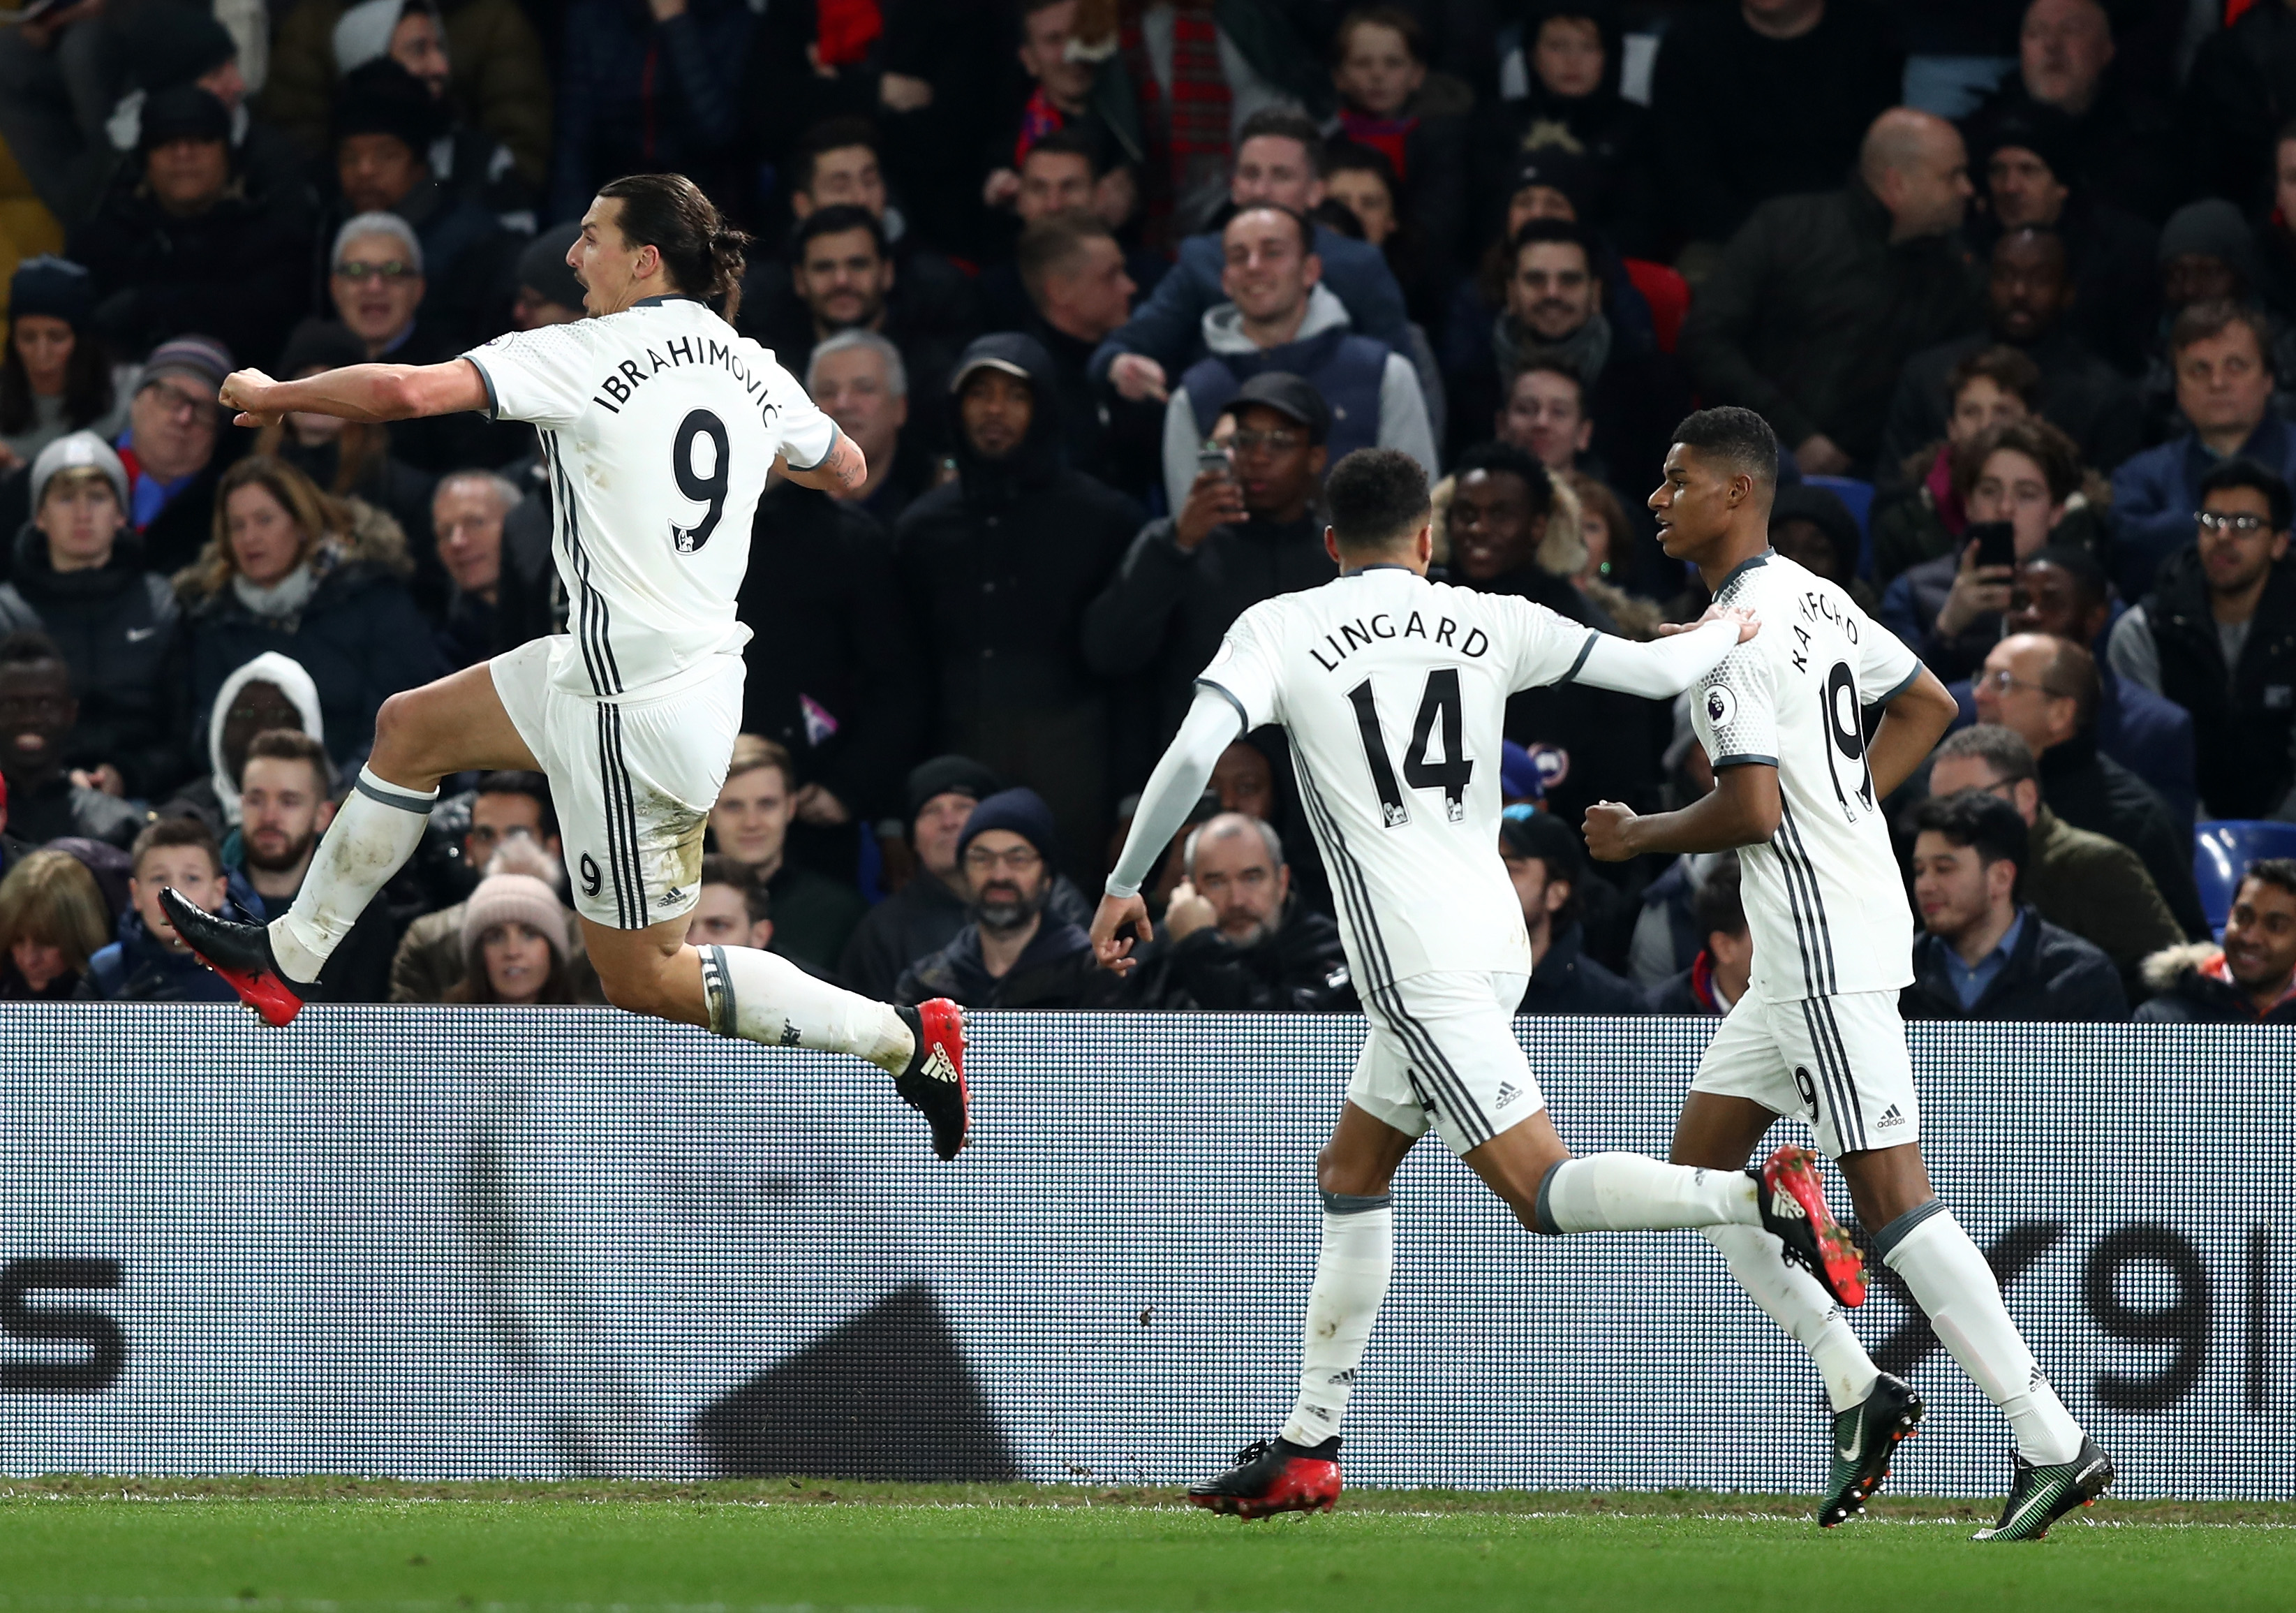 LONDON, ENGLAND - DECEMBER 14:  Zlatan Ibrahimovic (L) of Manchester United celebrates scoring his team's second goal during the Premier League match between Crystal Palace and Manchester United at Selhurst Park on December 14, 2016 in London, England.  (Photo by Clive Rose/Getty Images)